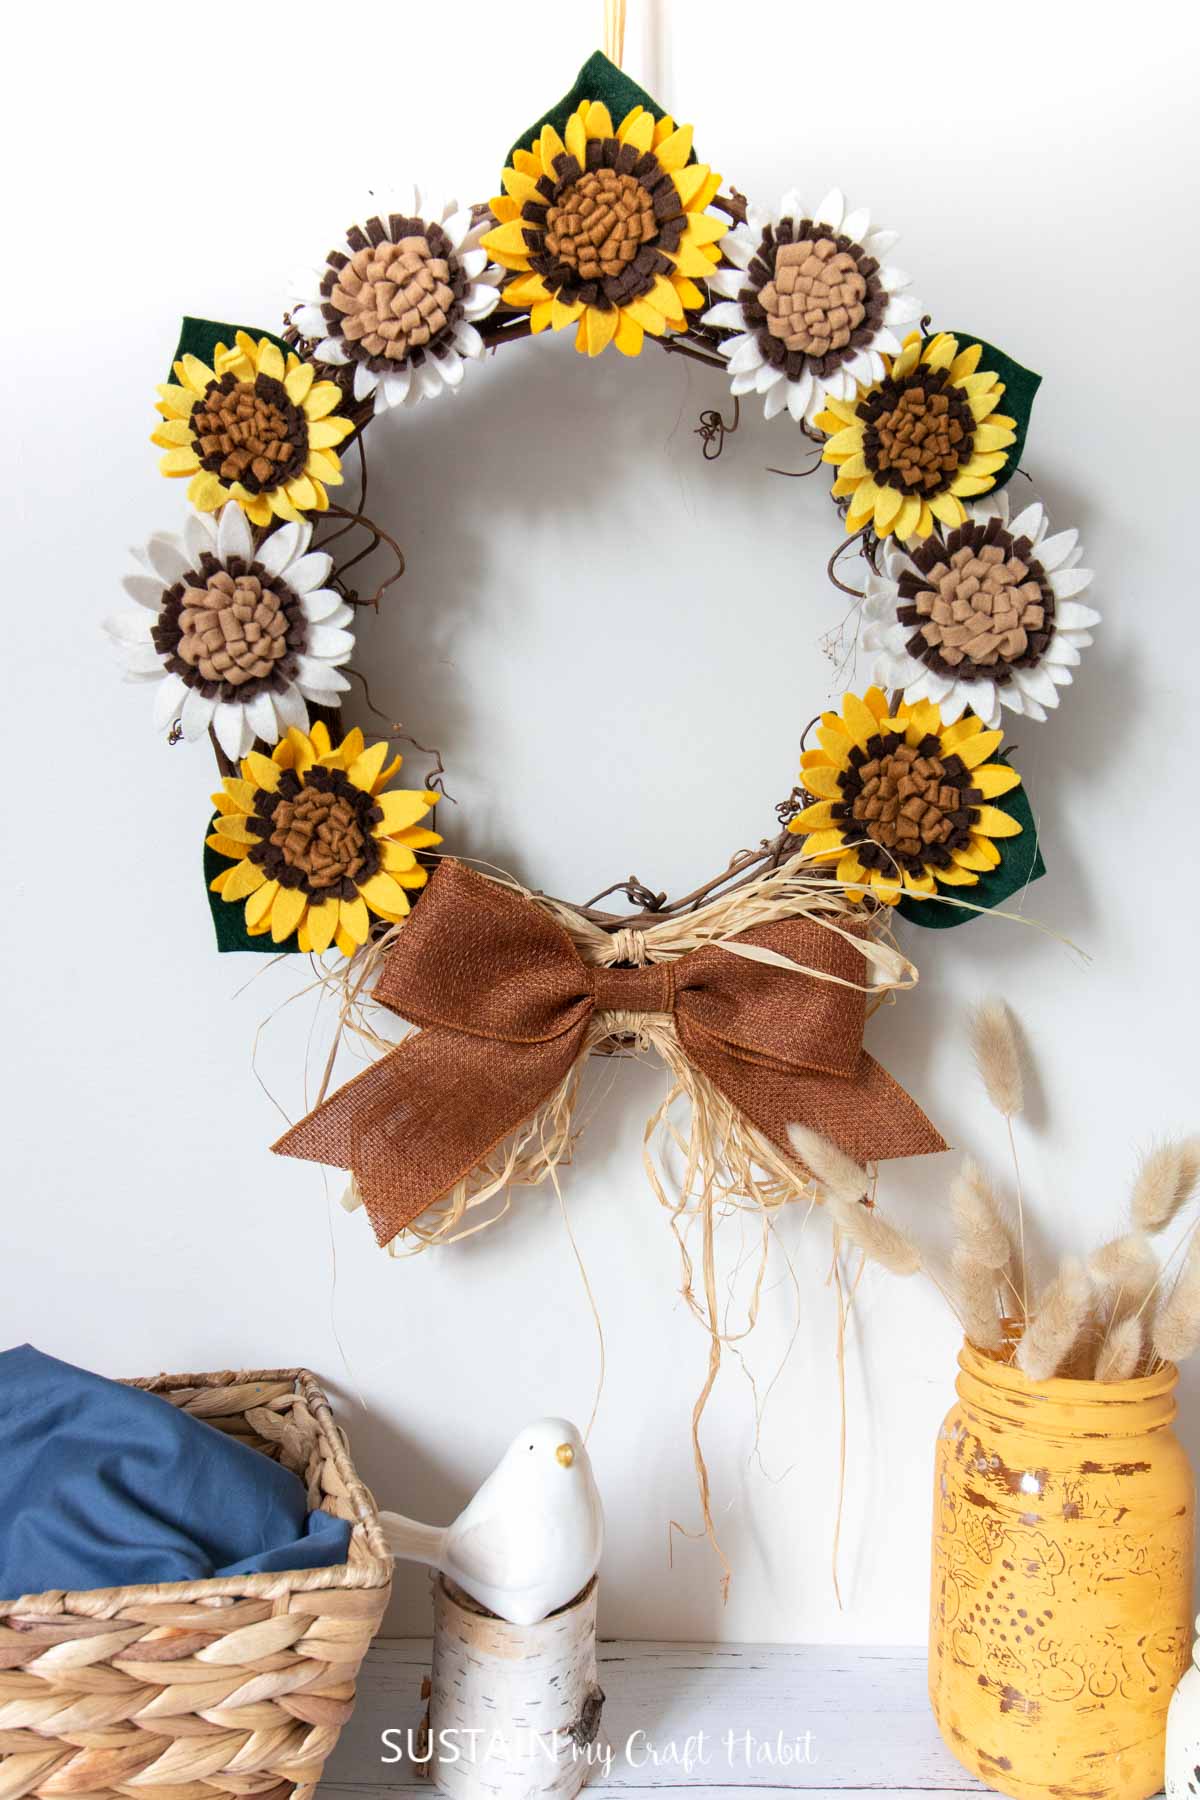 Felt DIY sunflower wreath hanging on a white wall. A yellow jar and white ceramic bird decorate the table underneath.